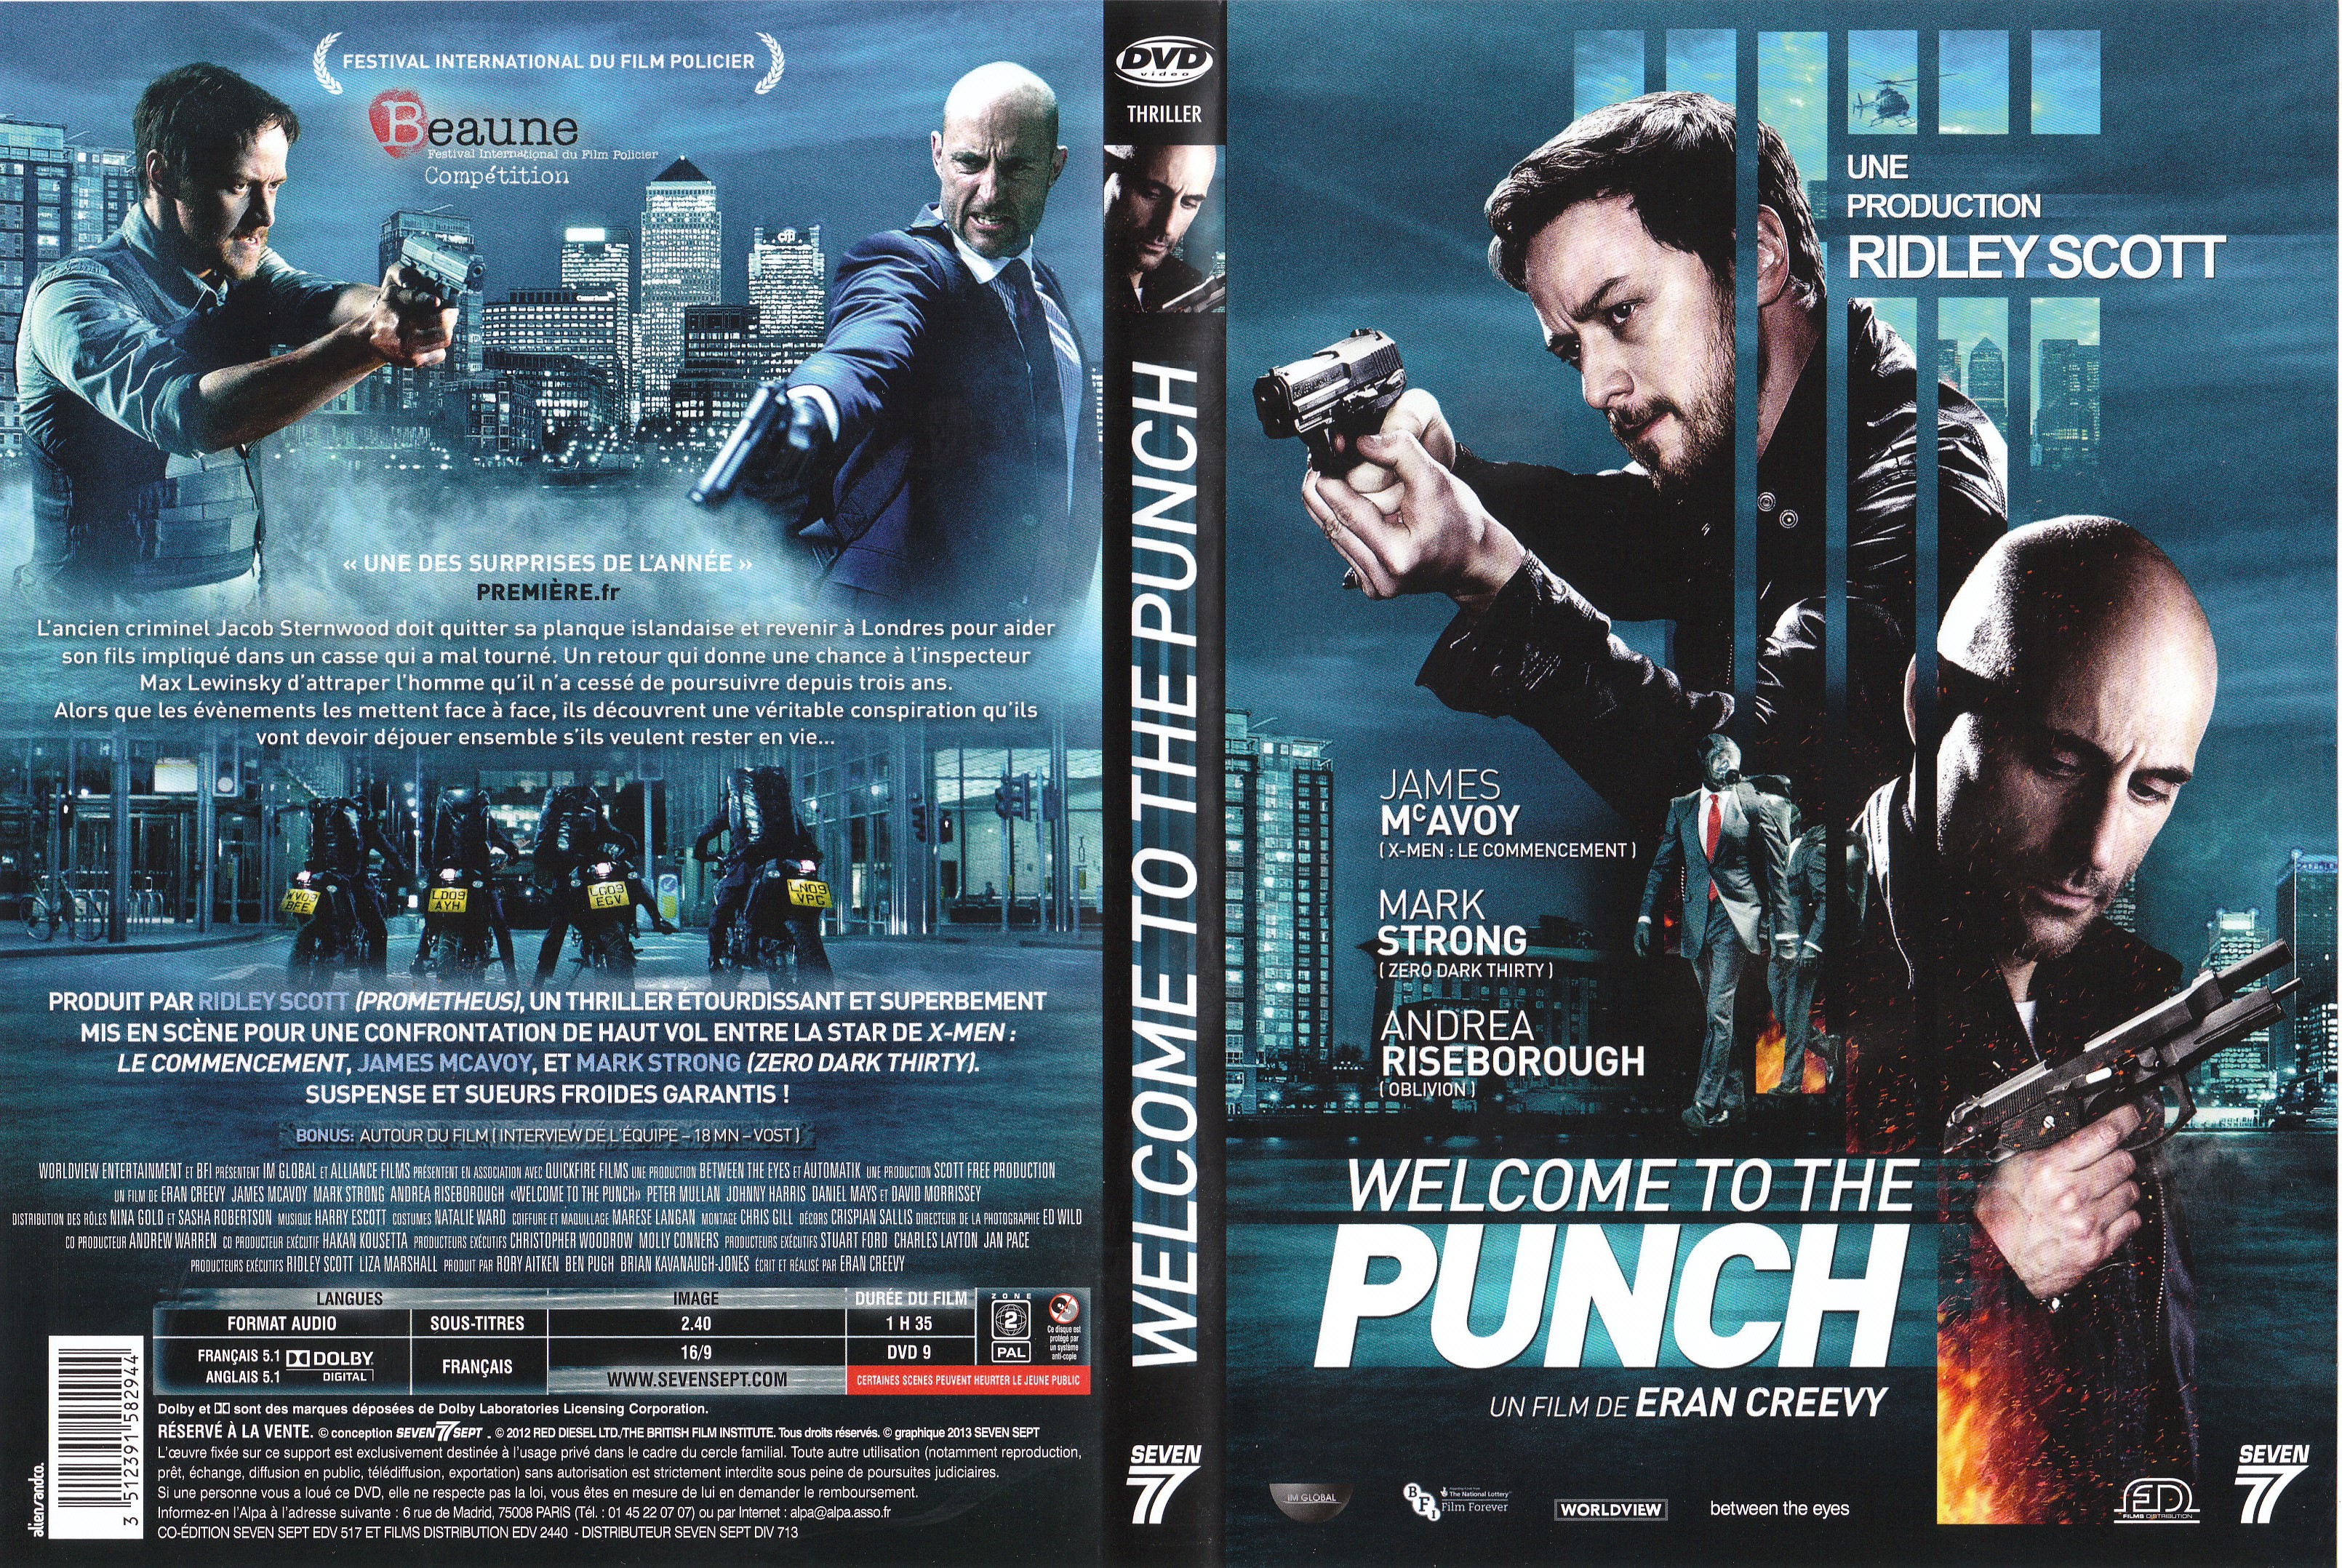 Jaquette DVD Welcome to the Punch